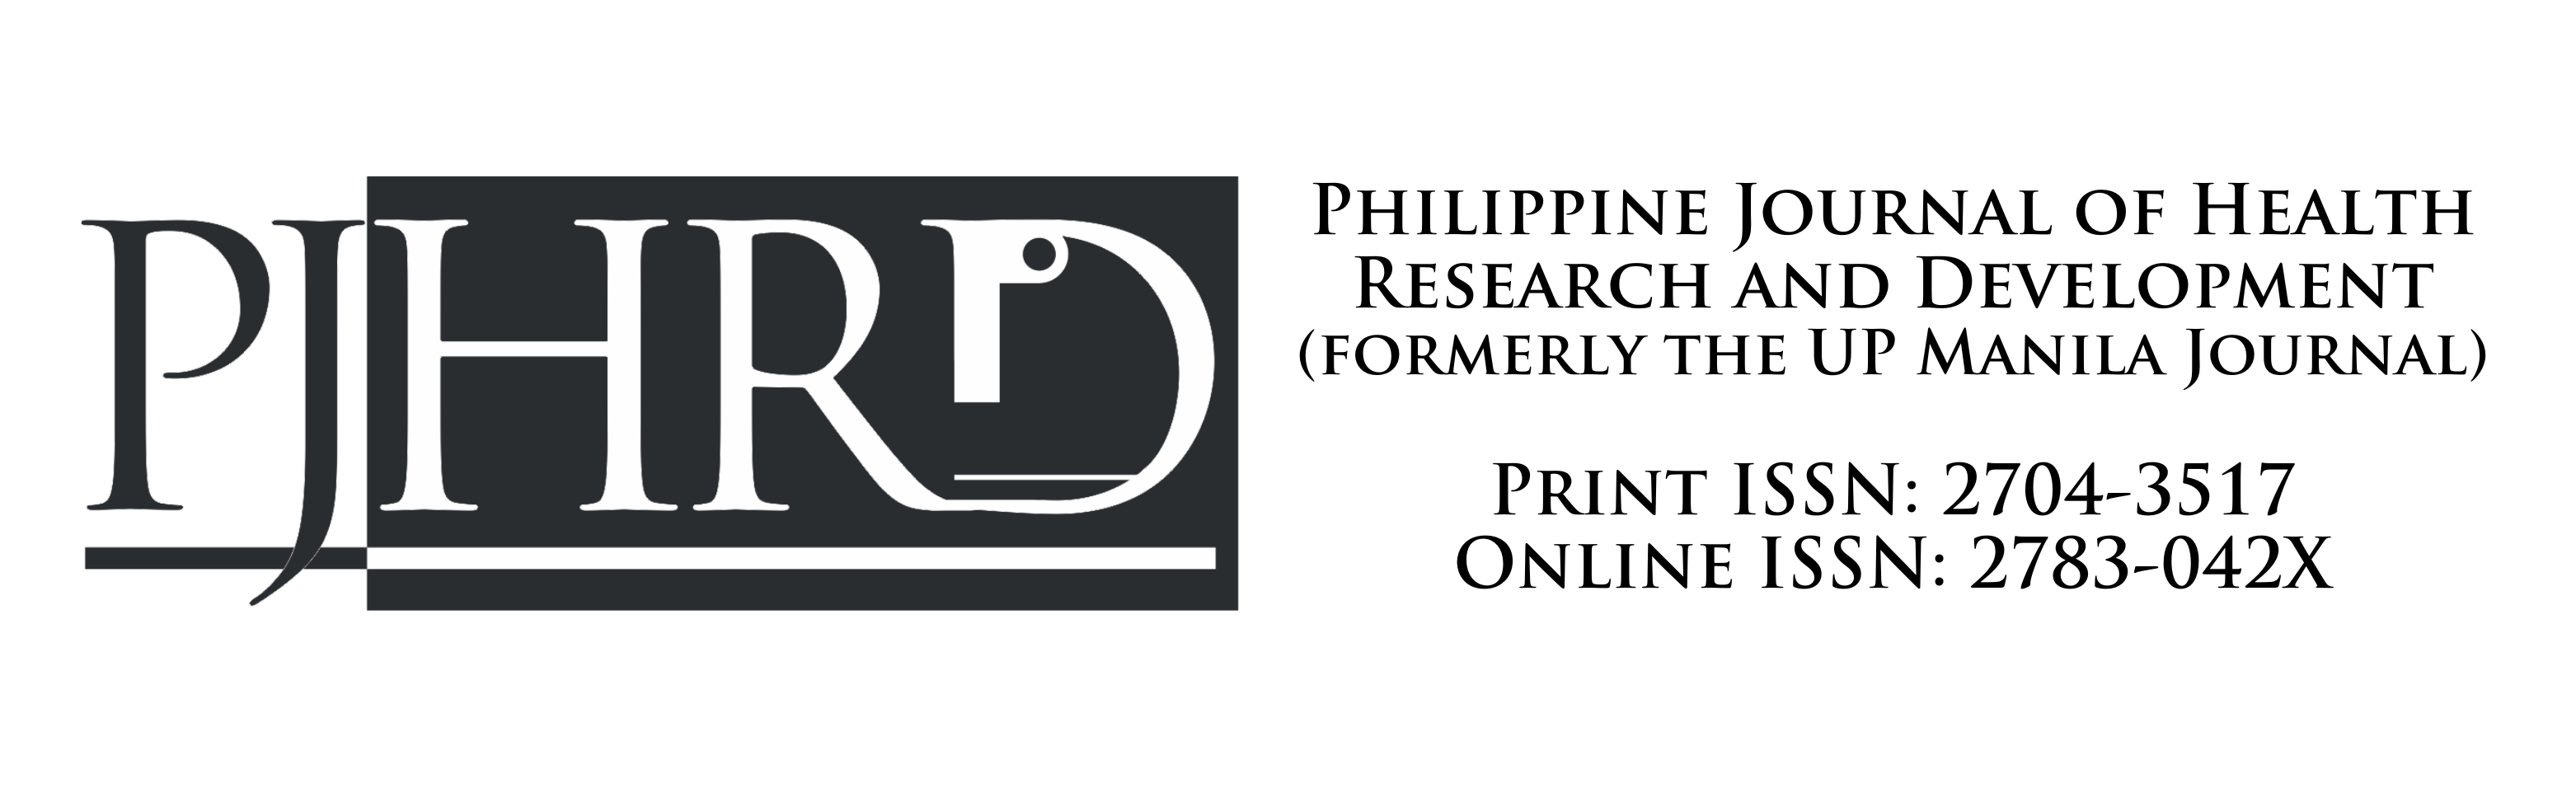 Philippine Journal of Health Research and Development (formerly the UP Manila Journal)